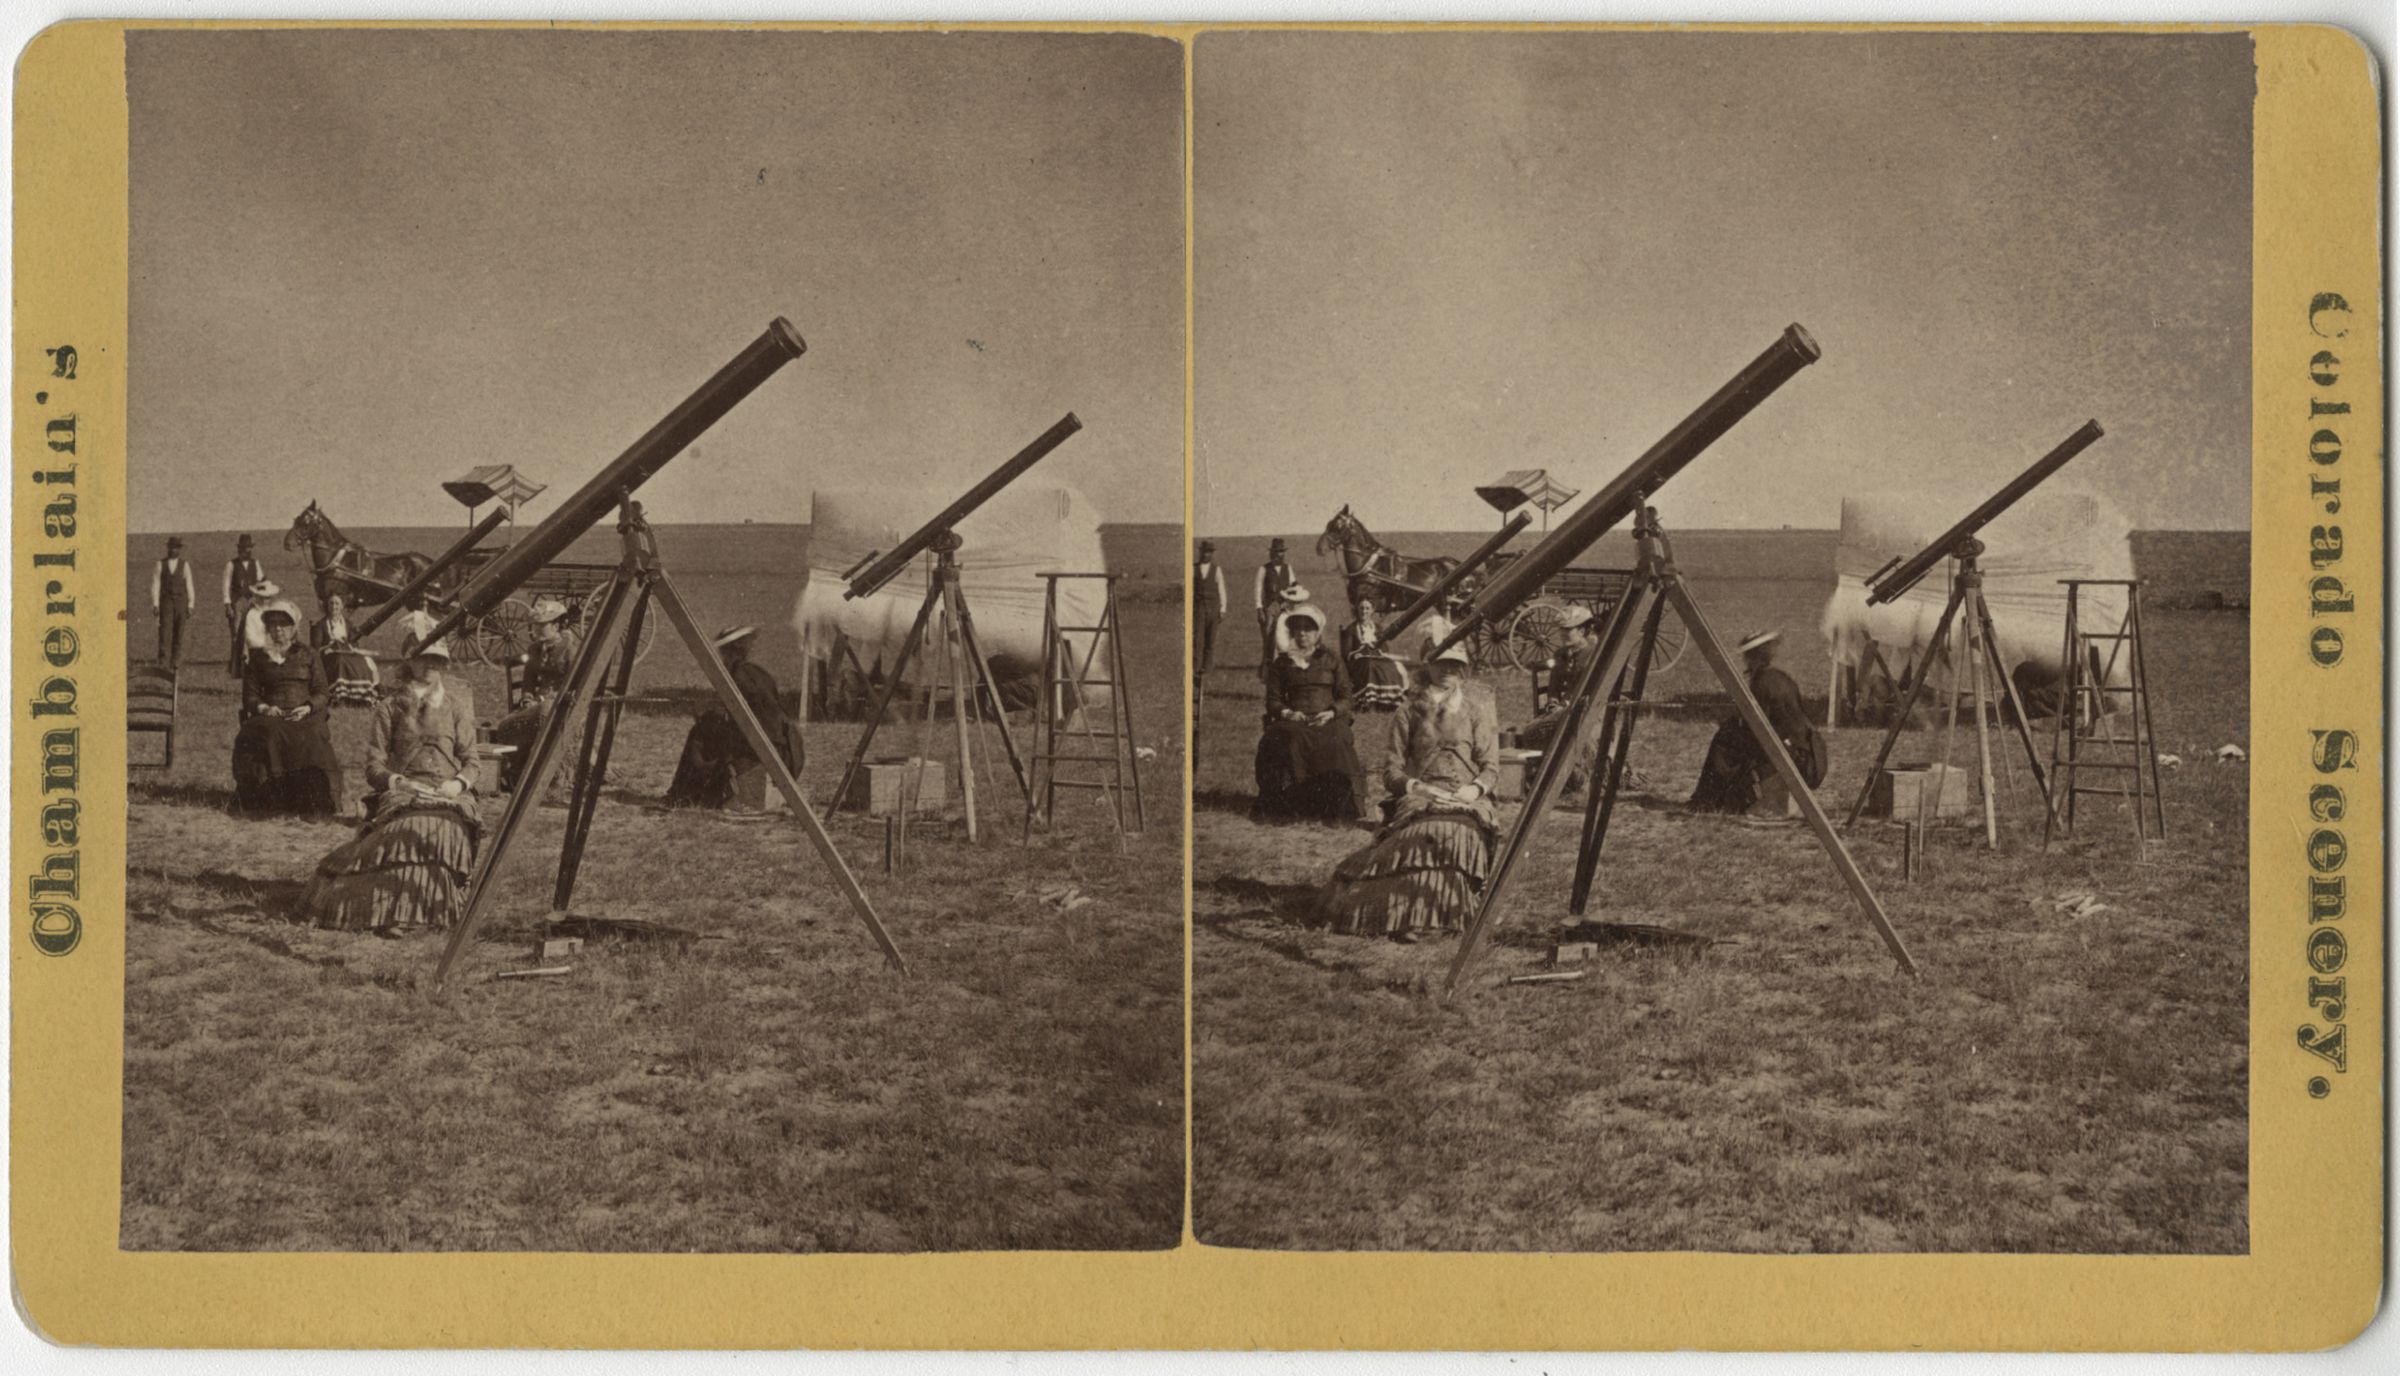 The 1878 Vassar College eclipse party in Denver. Astronomer Maria Mitchell sits in the middle ground on the far left.